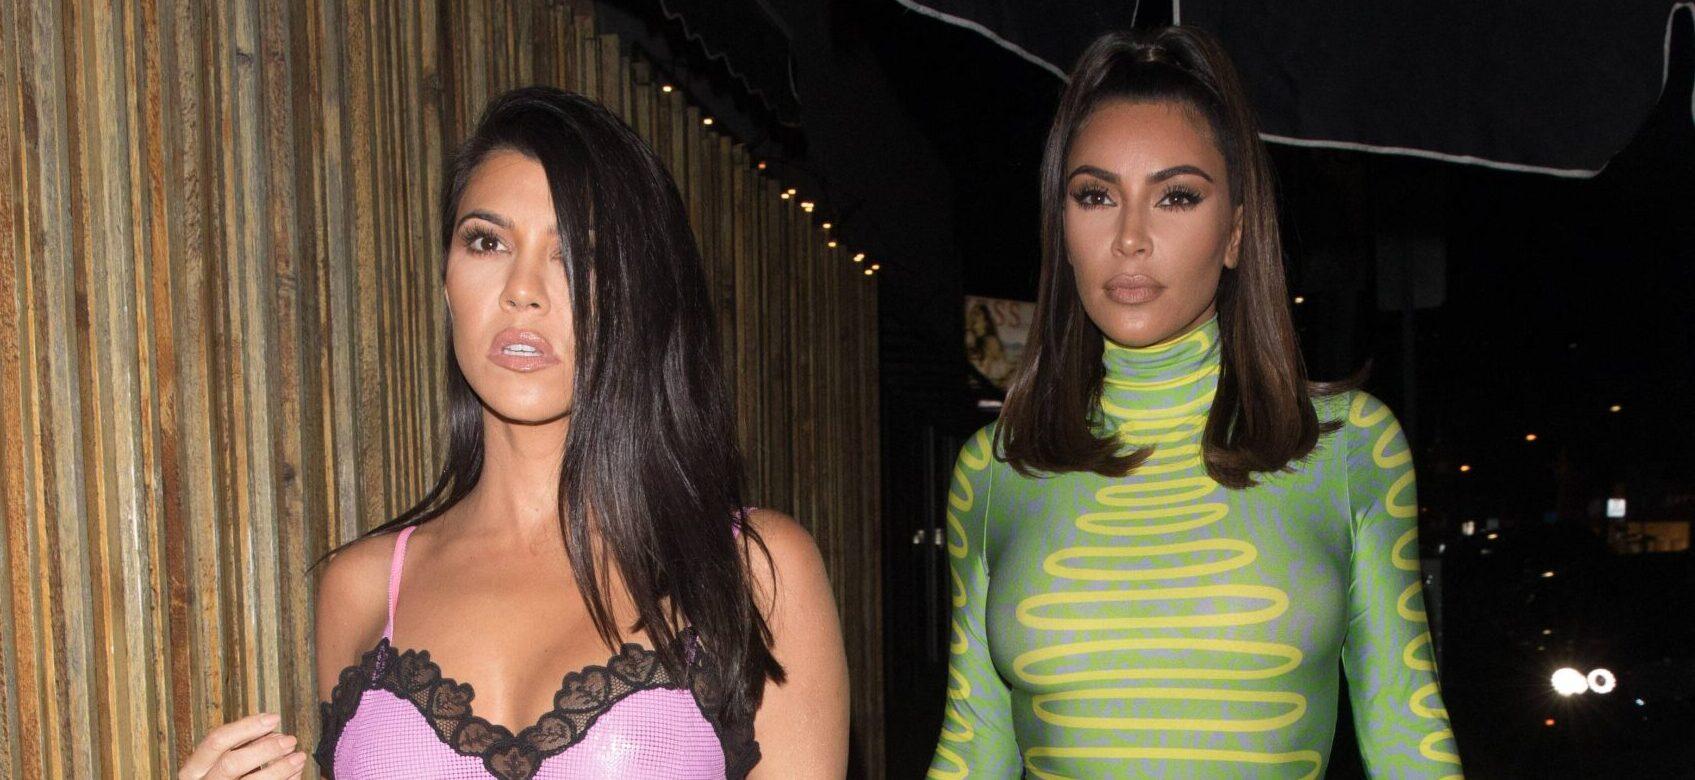 Kim Kardashian and Kourtney Kardashian are both spotted arriving to The Nice Guy in West Hollywood